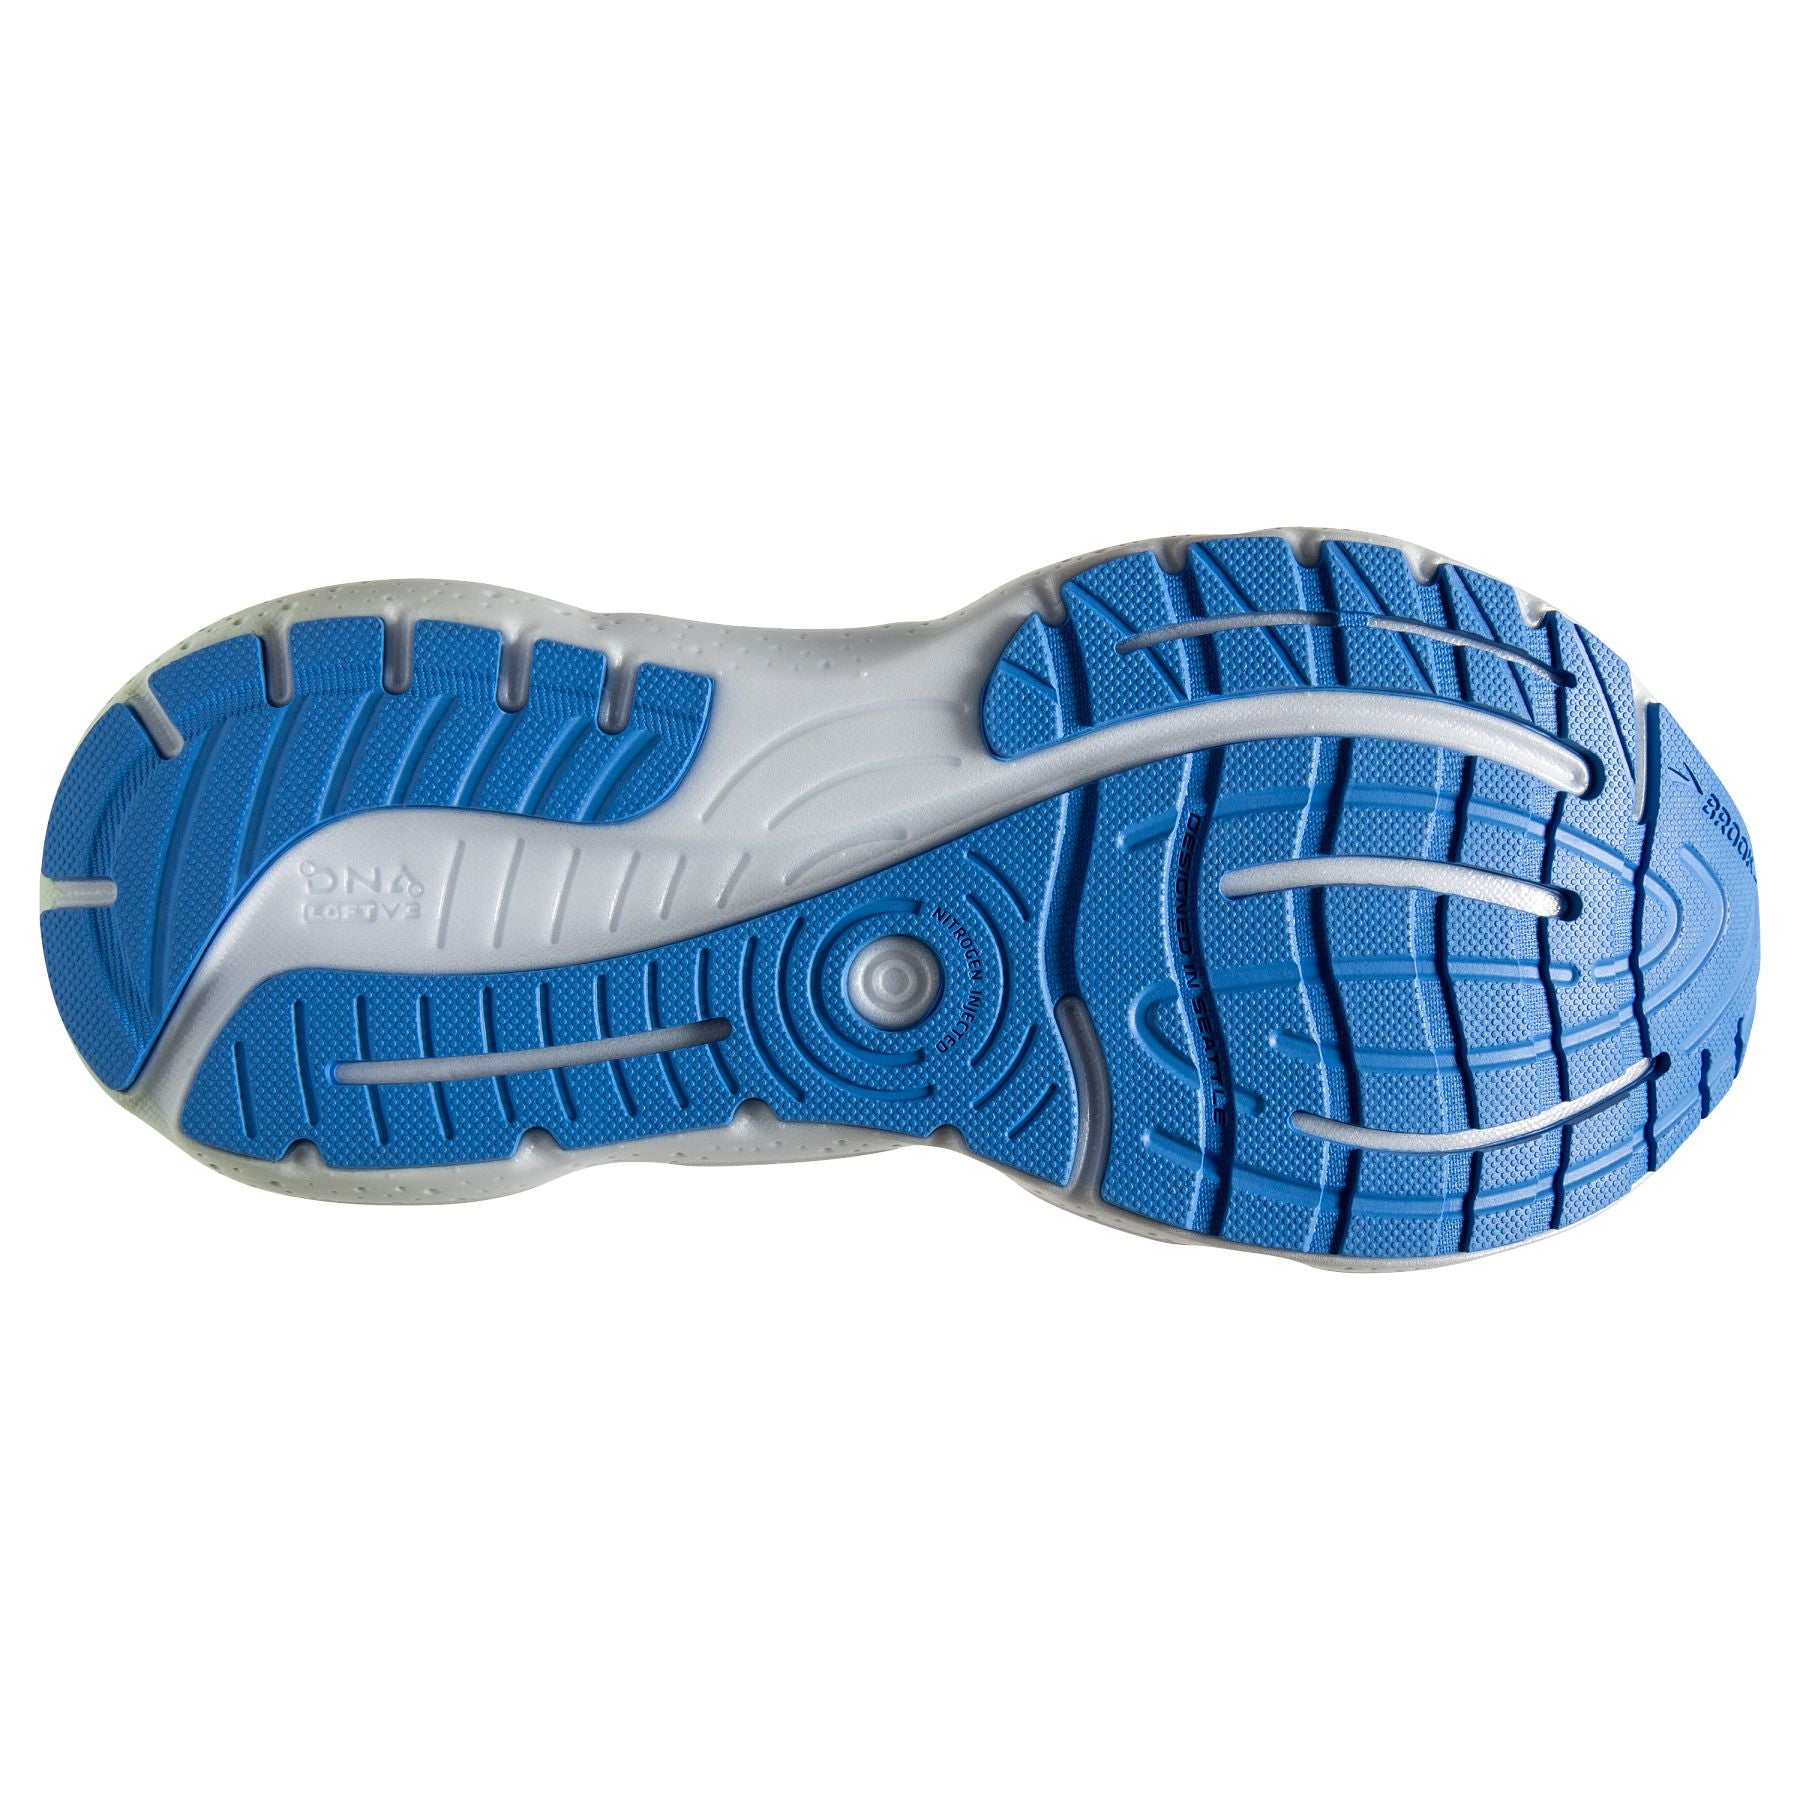 Bottom (outer sole) view of the Women's Glycerin GTS 20 in the color Blue Glass/Marina/Legion Blue